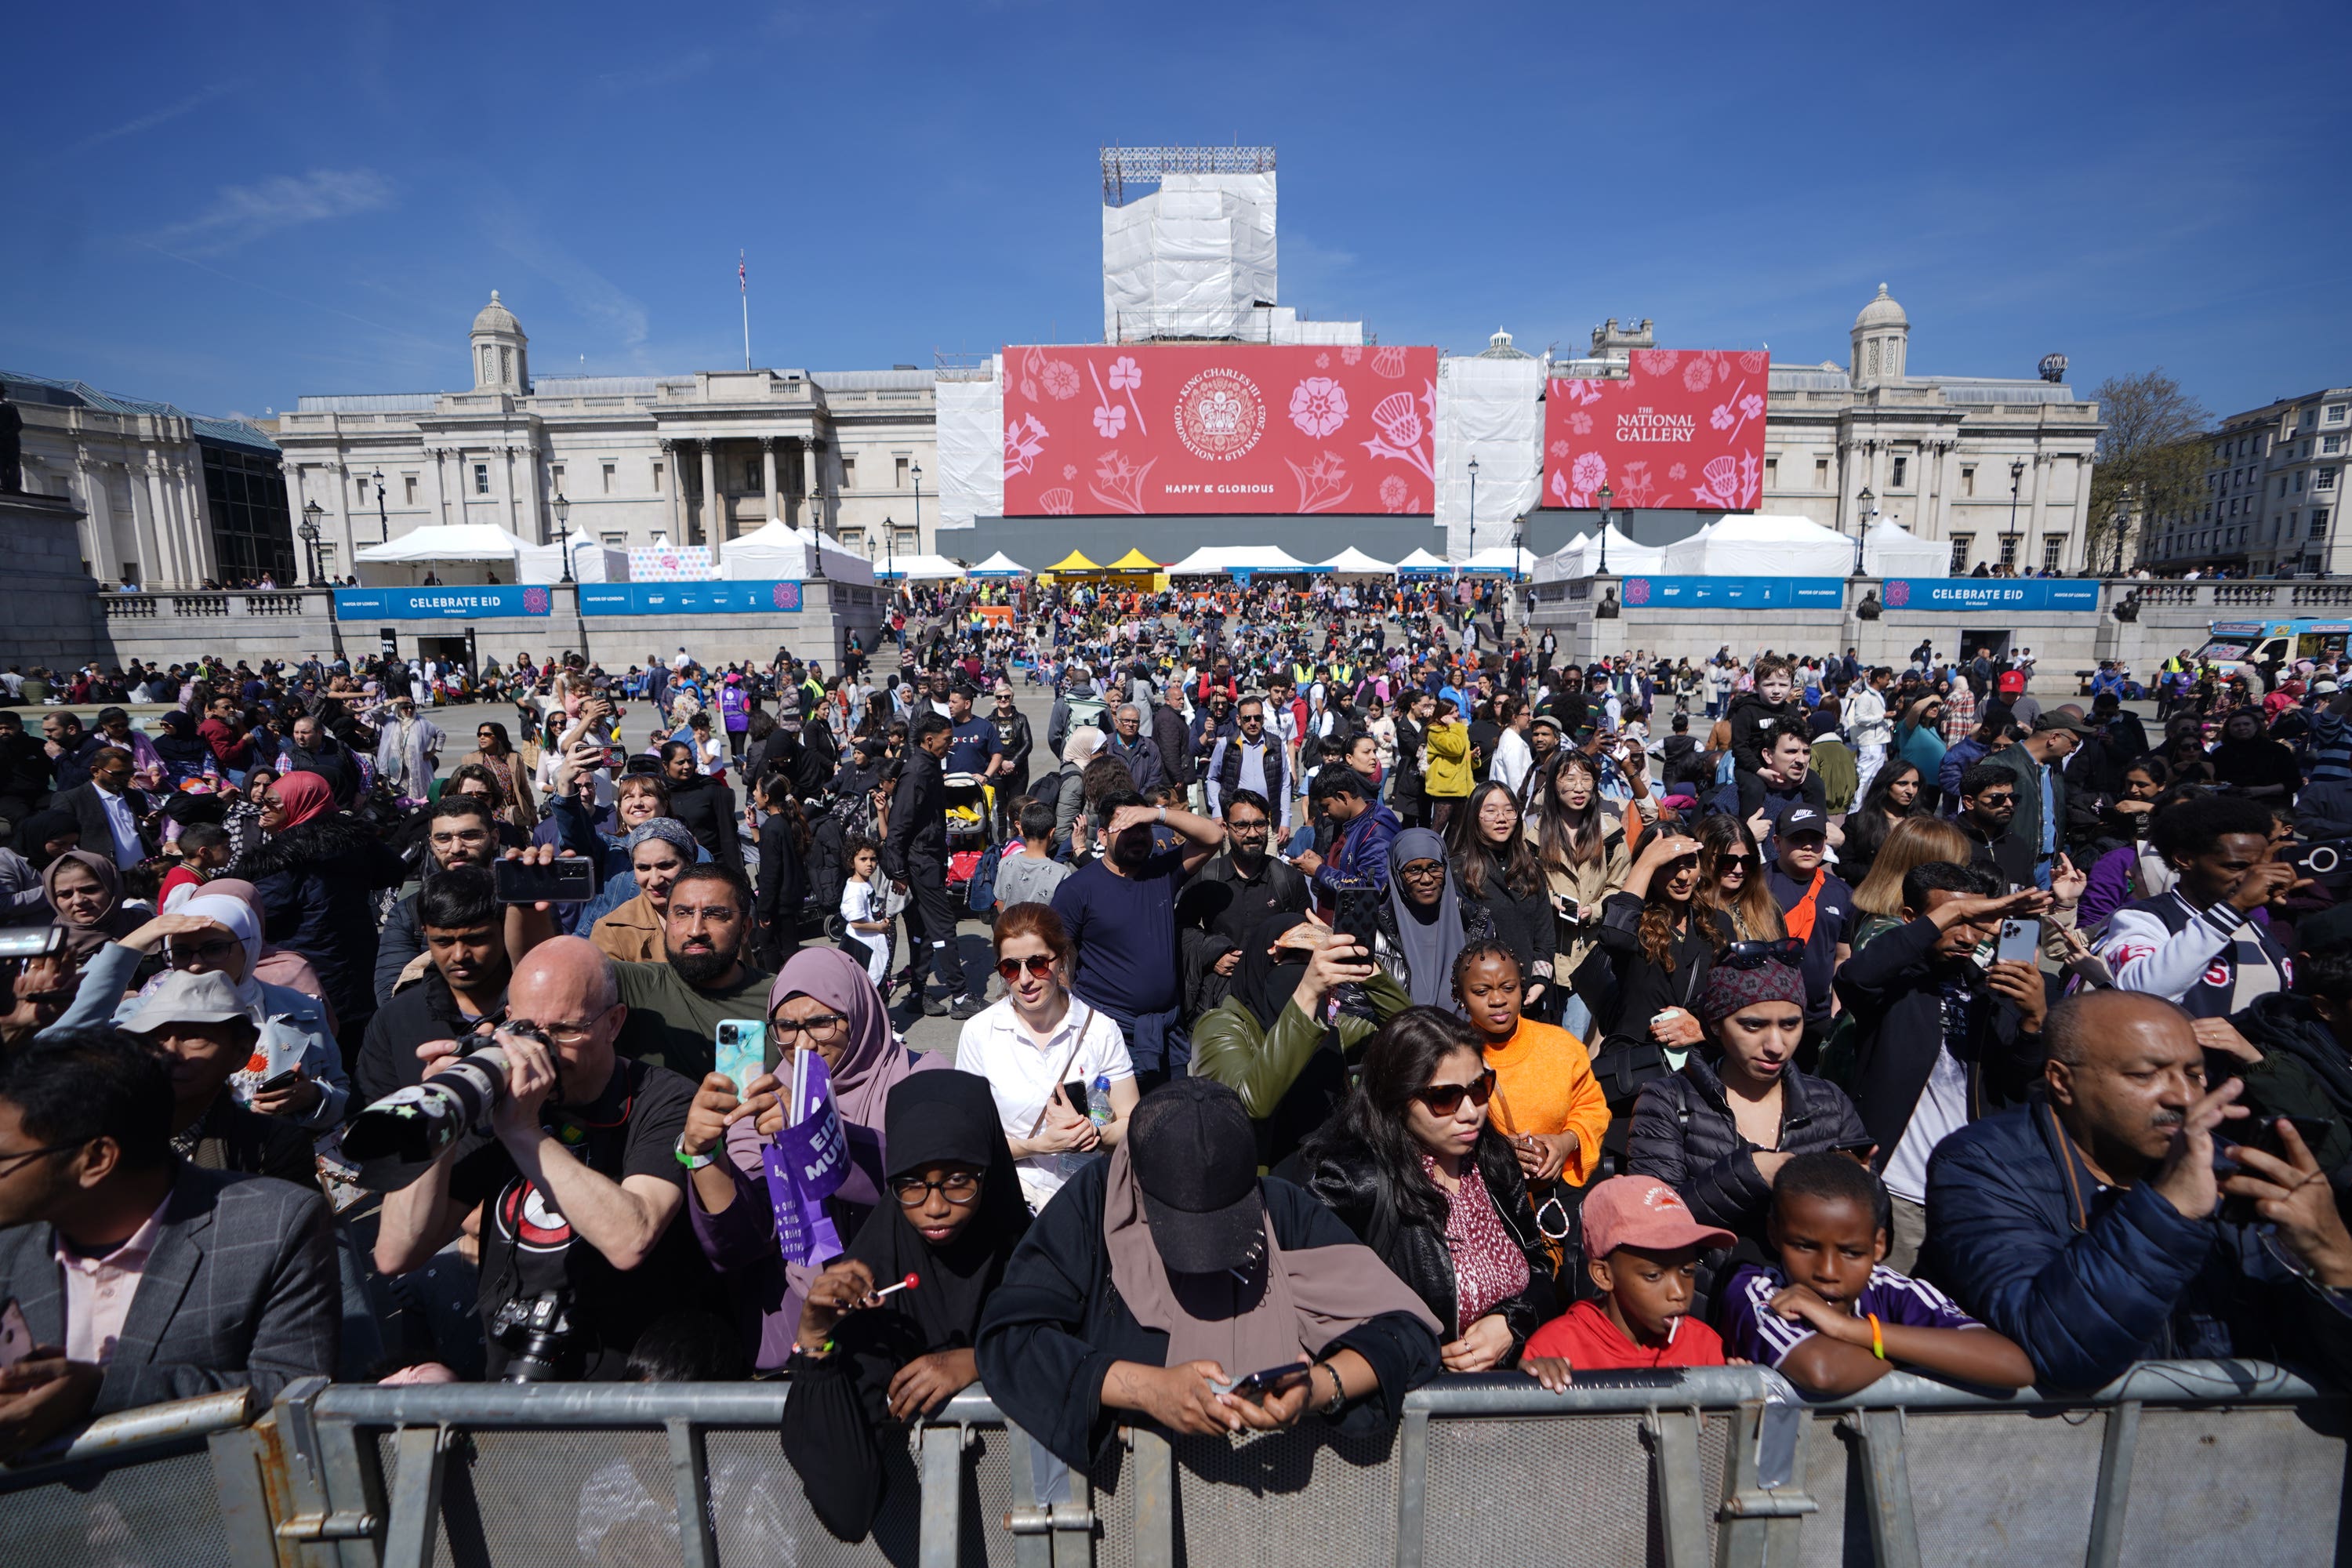 The crowd during the Eid in the Square festival in Trafalgar Square, London (James Manning/PA)